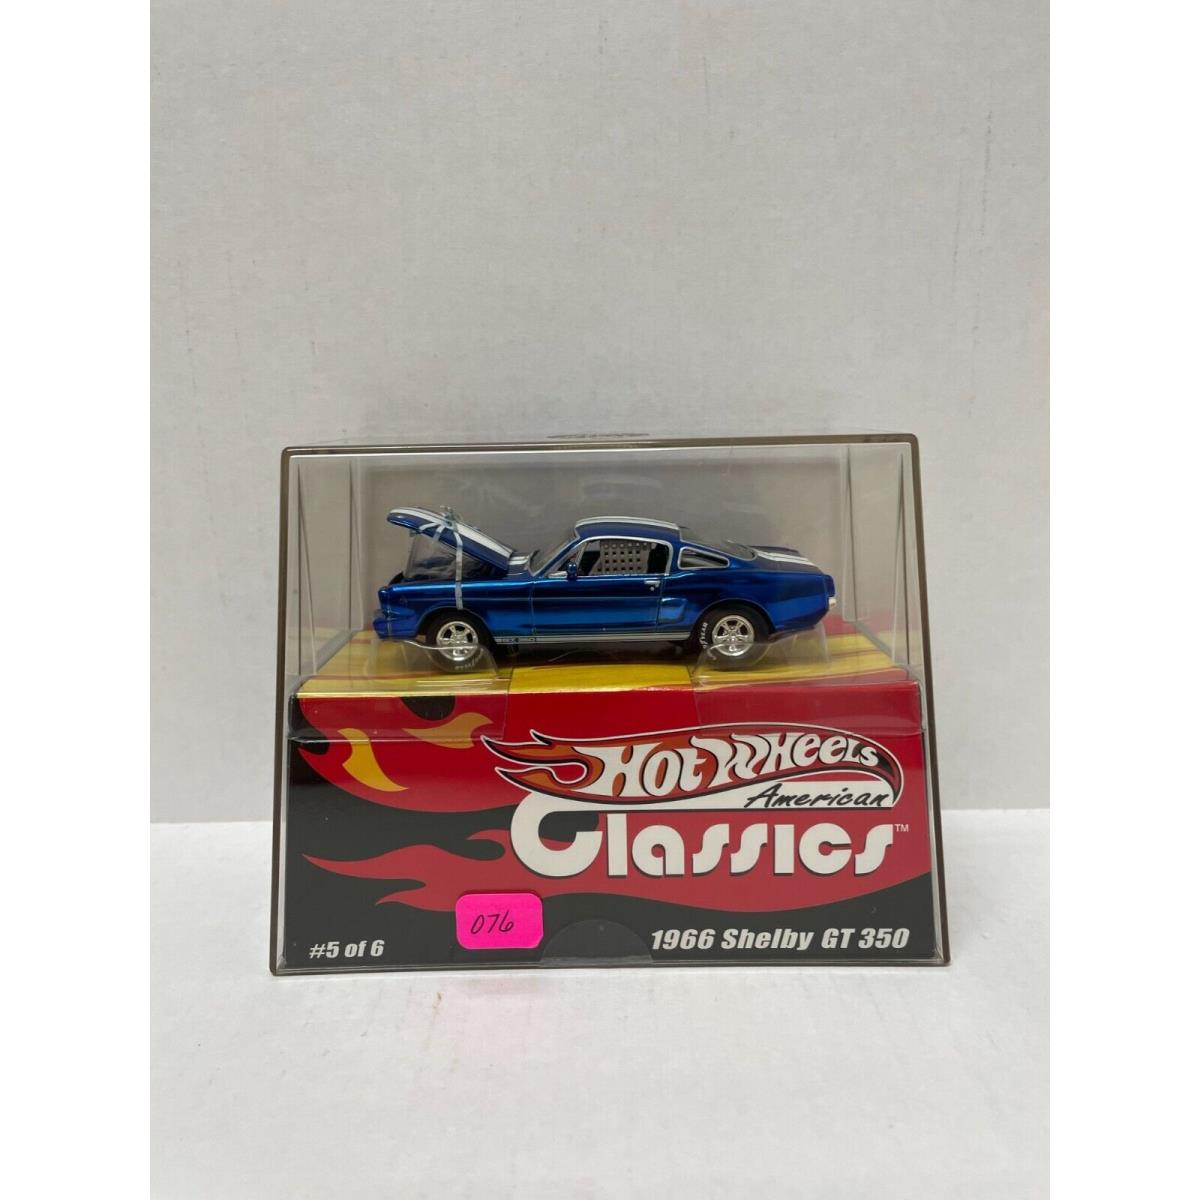 2003 Hot Wheels American Classics 1966 Shelby GT 350 1/32 Scale